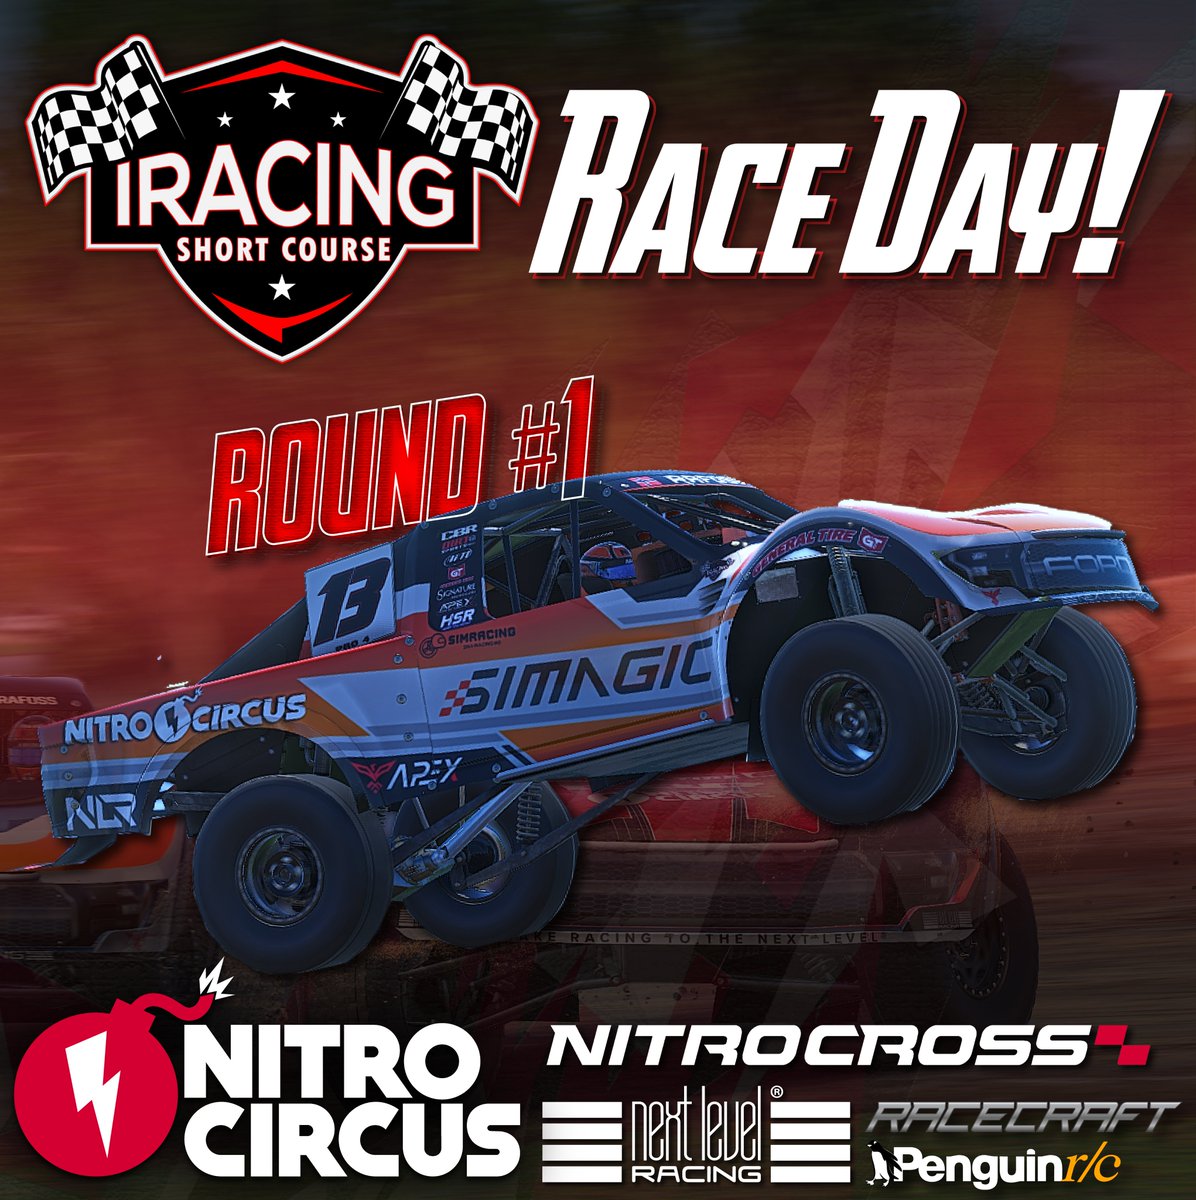 IT IS JUMPY TRUCK RACE DAY 🚨

@Connor_Barry_2 & @jakob_rafoss are ready to go for tonight's @iRacingshort Season Opener at Wild West🔥Watch it live on Youtube at 6:00pm PT! #NitroCircus